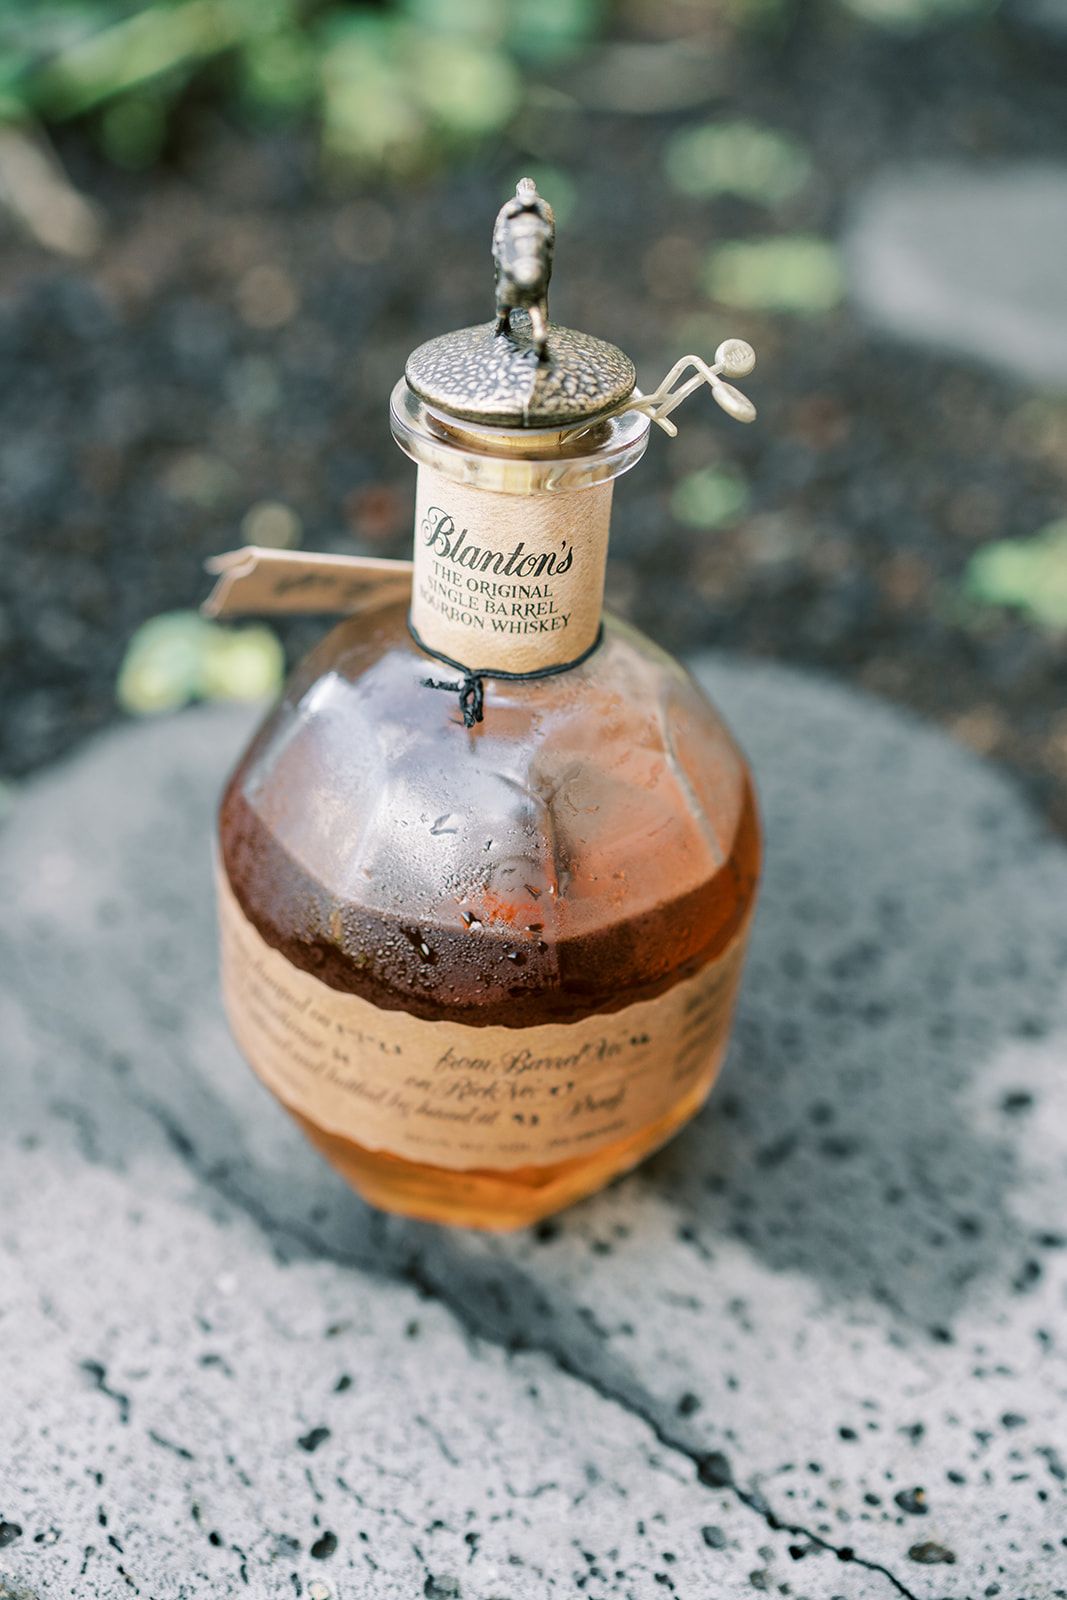 A bottle of blanton's single barrel bourbon displayed on a textured surface with condensation at Hawaiian Wedding.